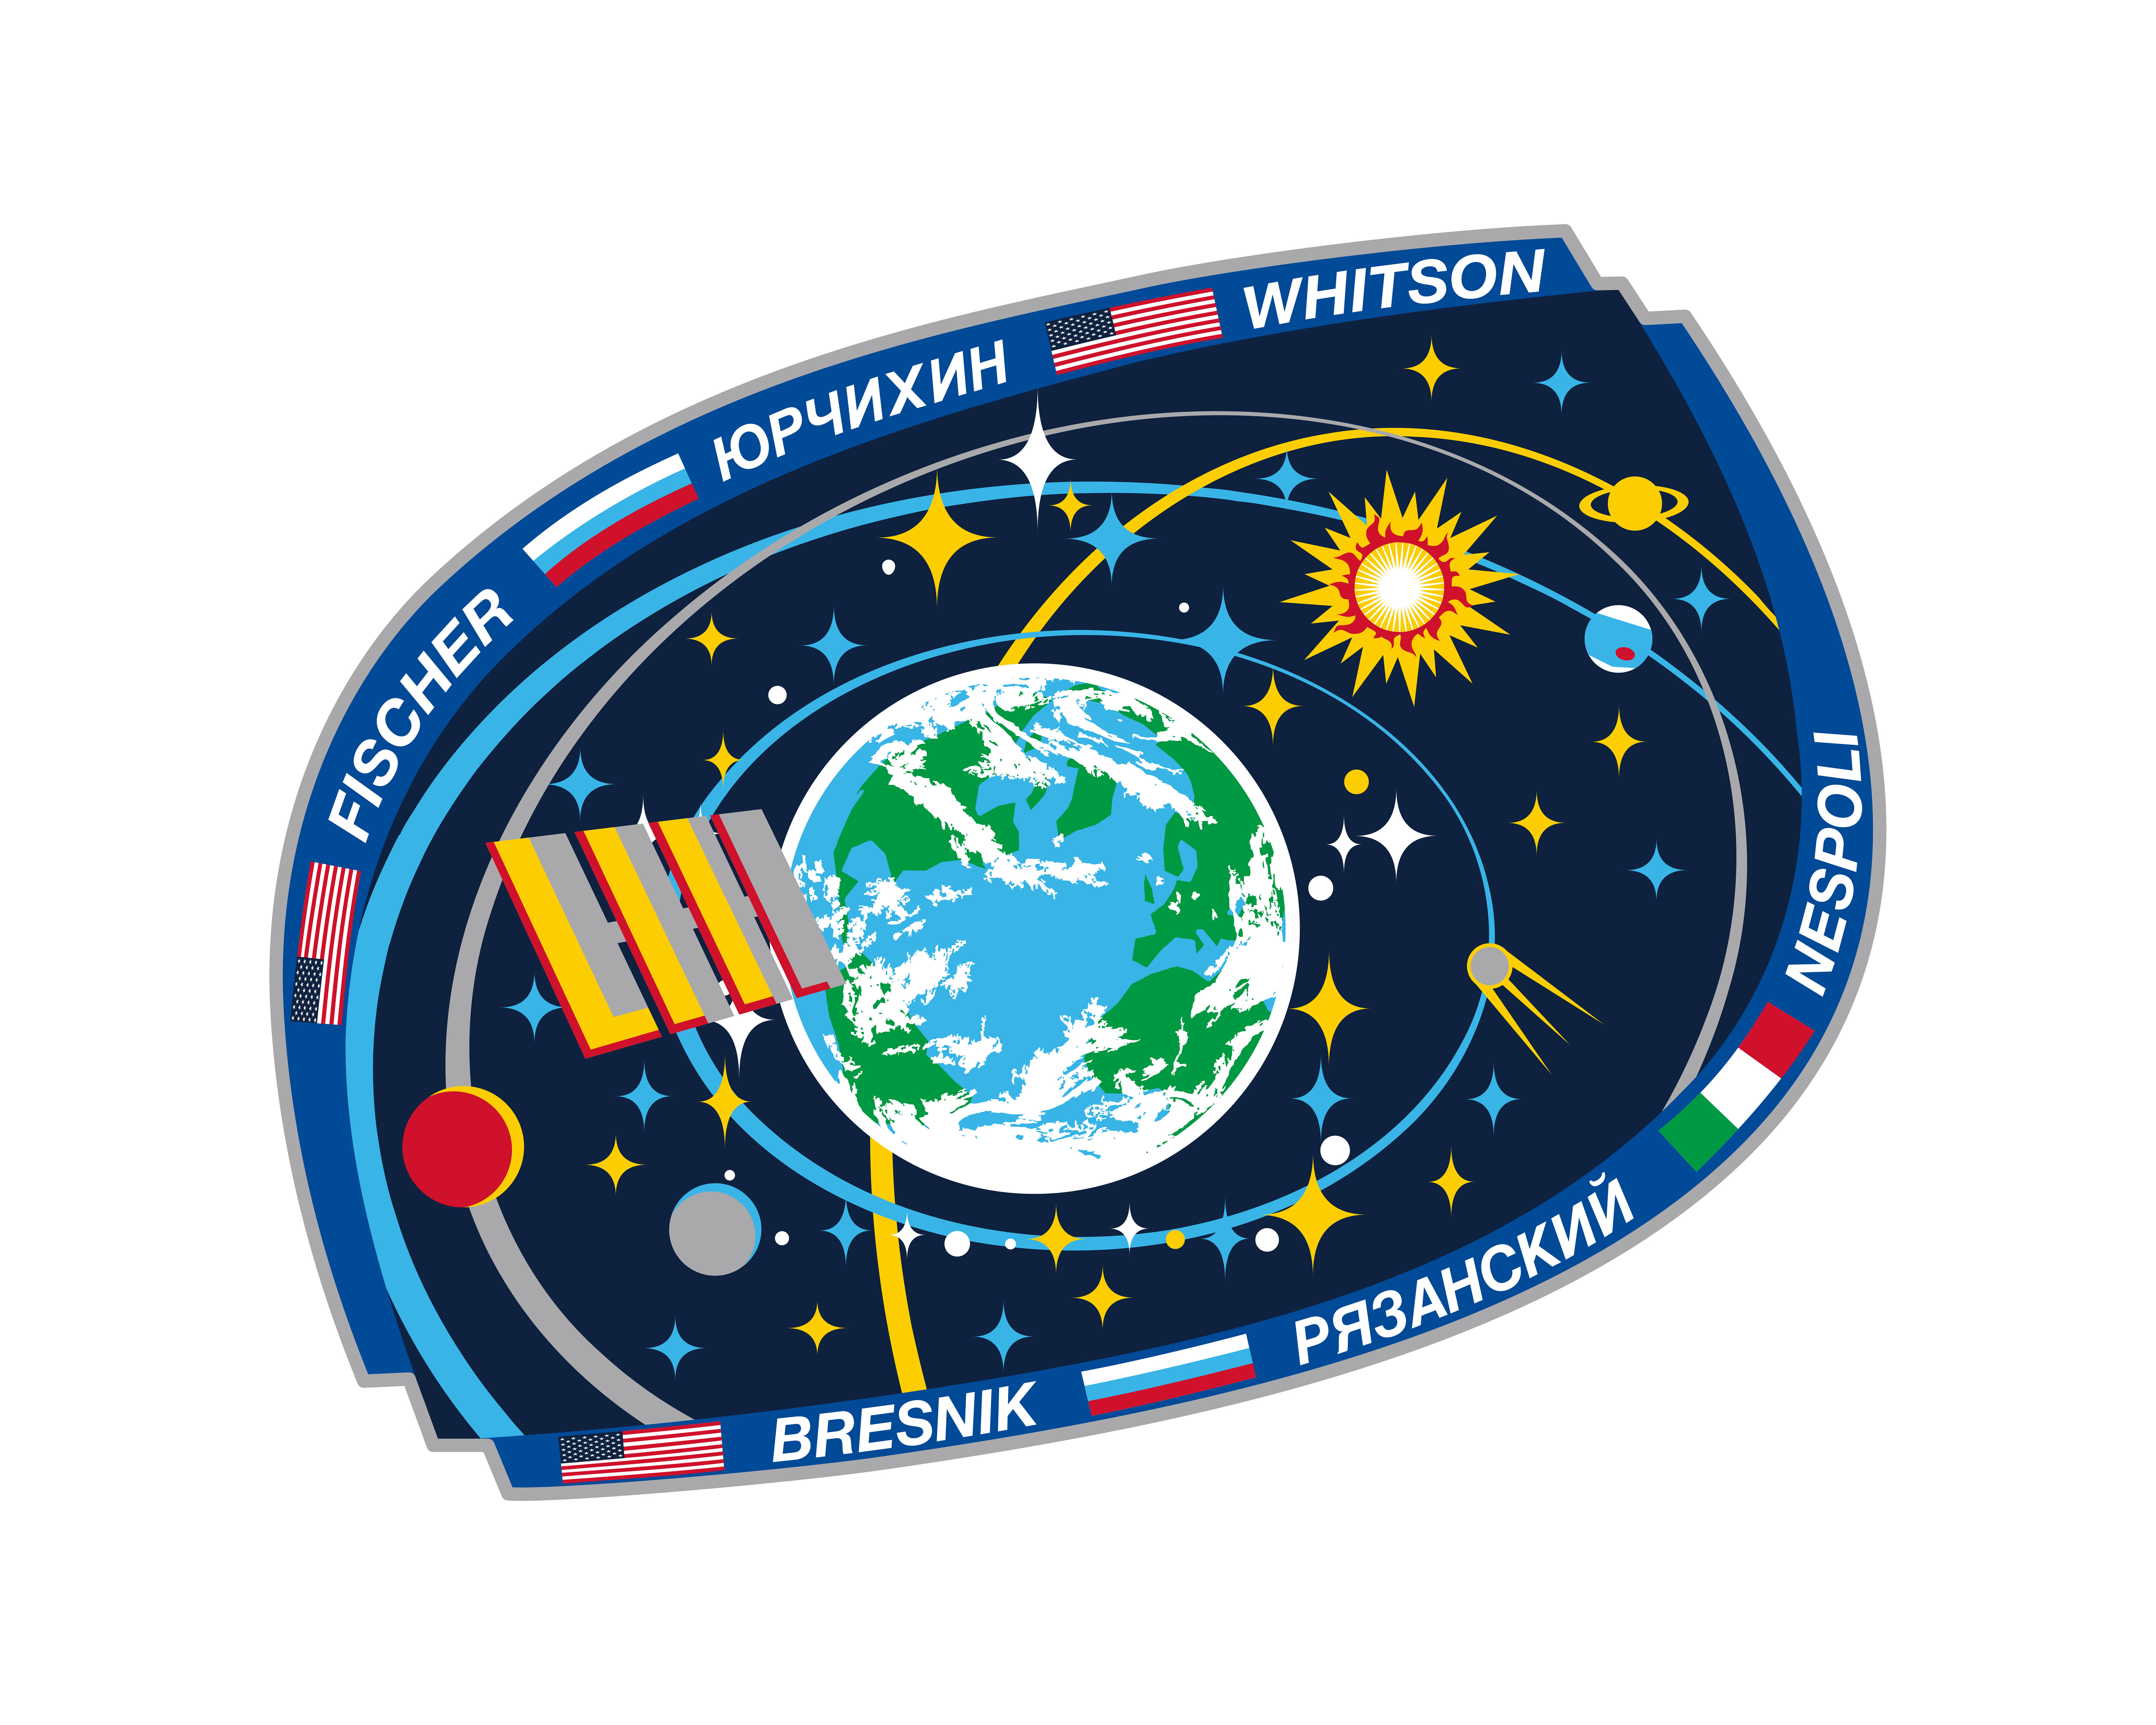 Expedition 52 Official Crew Insignia